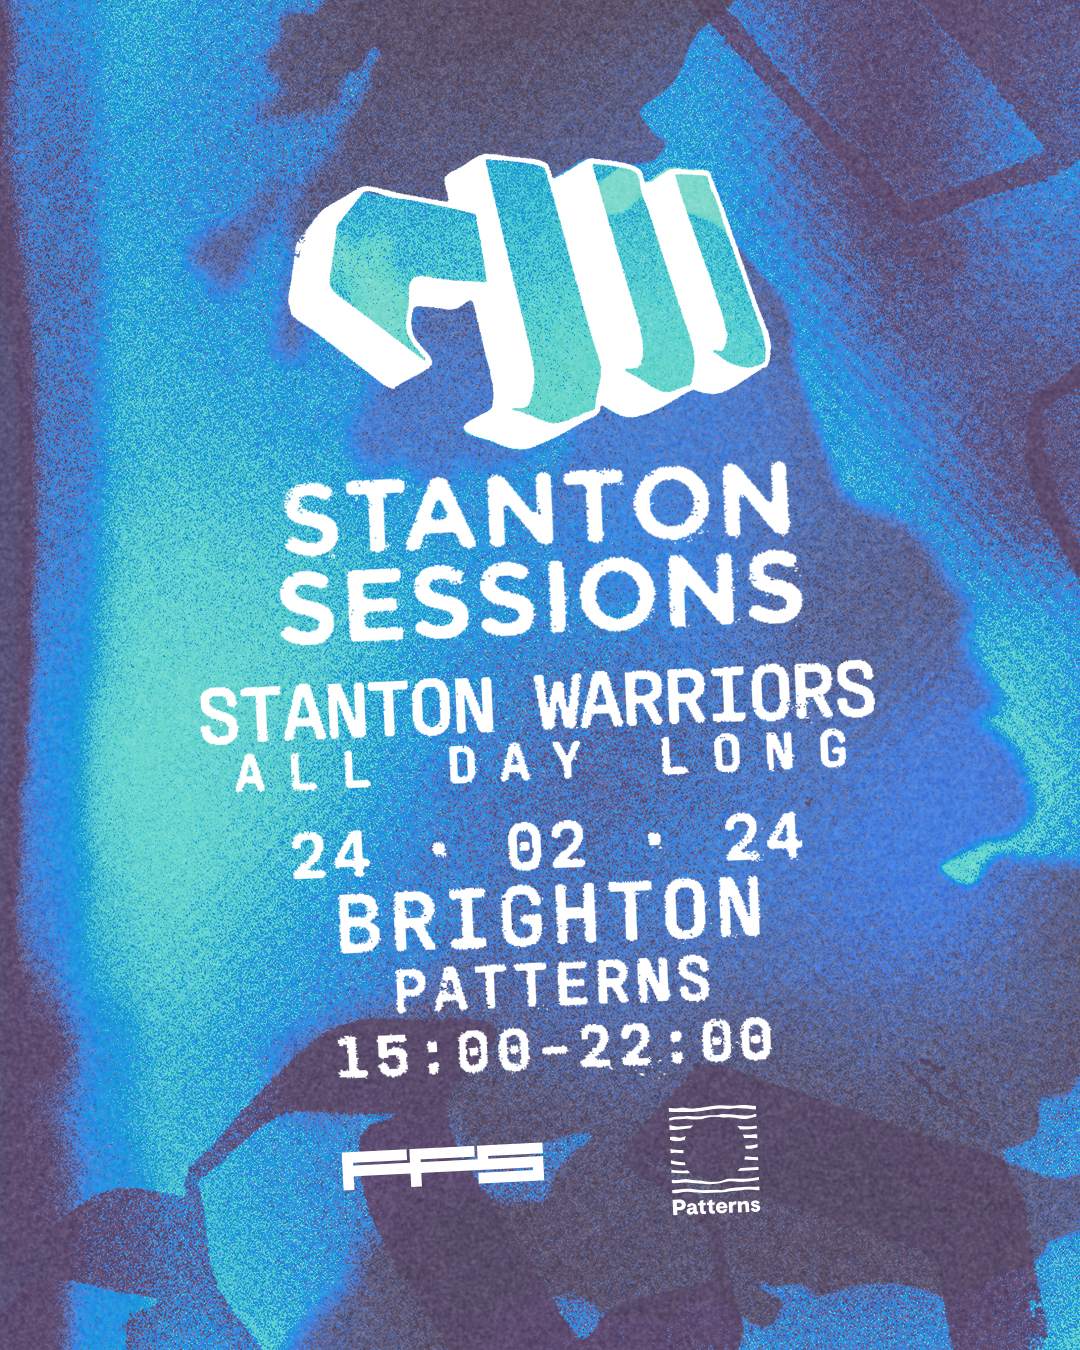 Stanton Sessions: All Day Long - Brighton - フライヤー裏